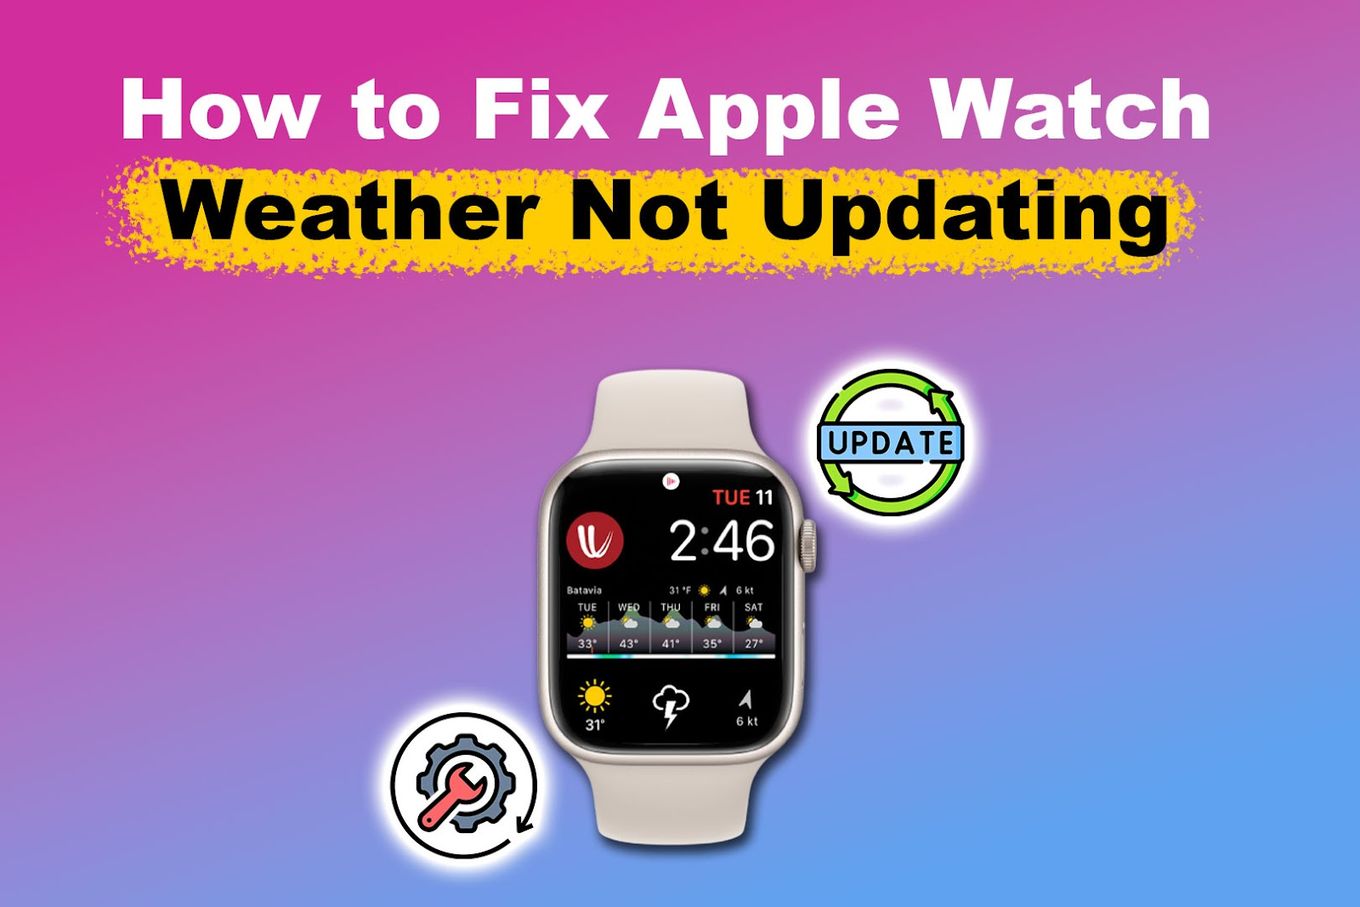 How to Fix Apple Watch Weather Not Updating